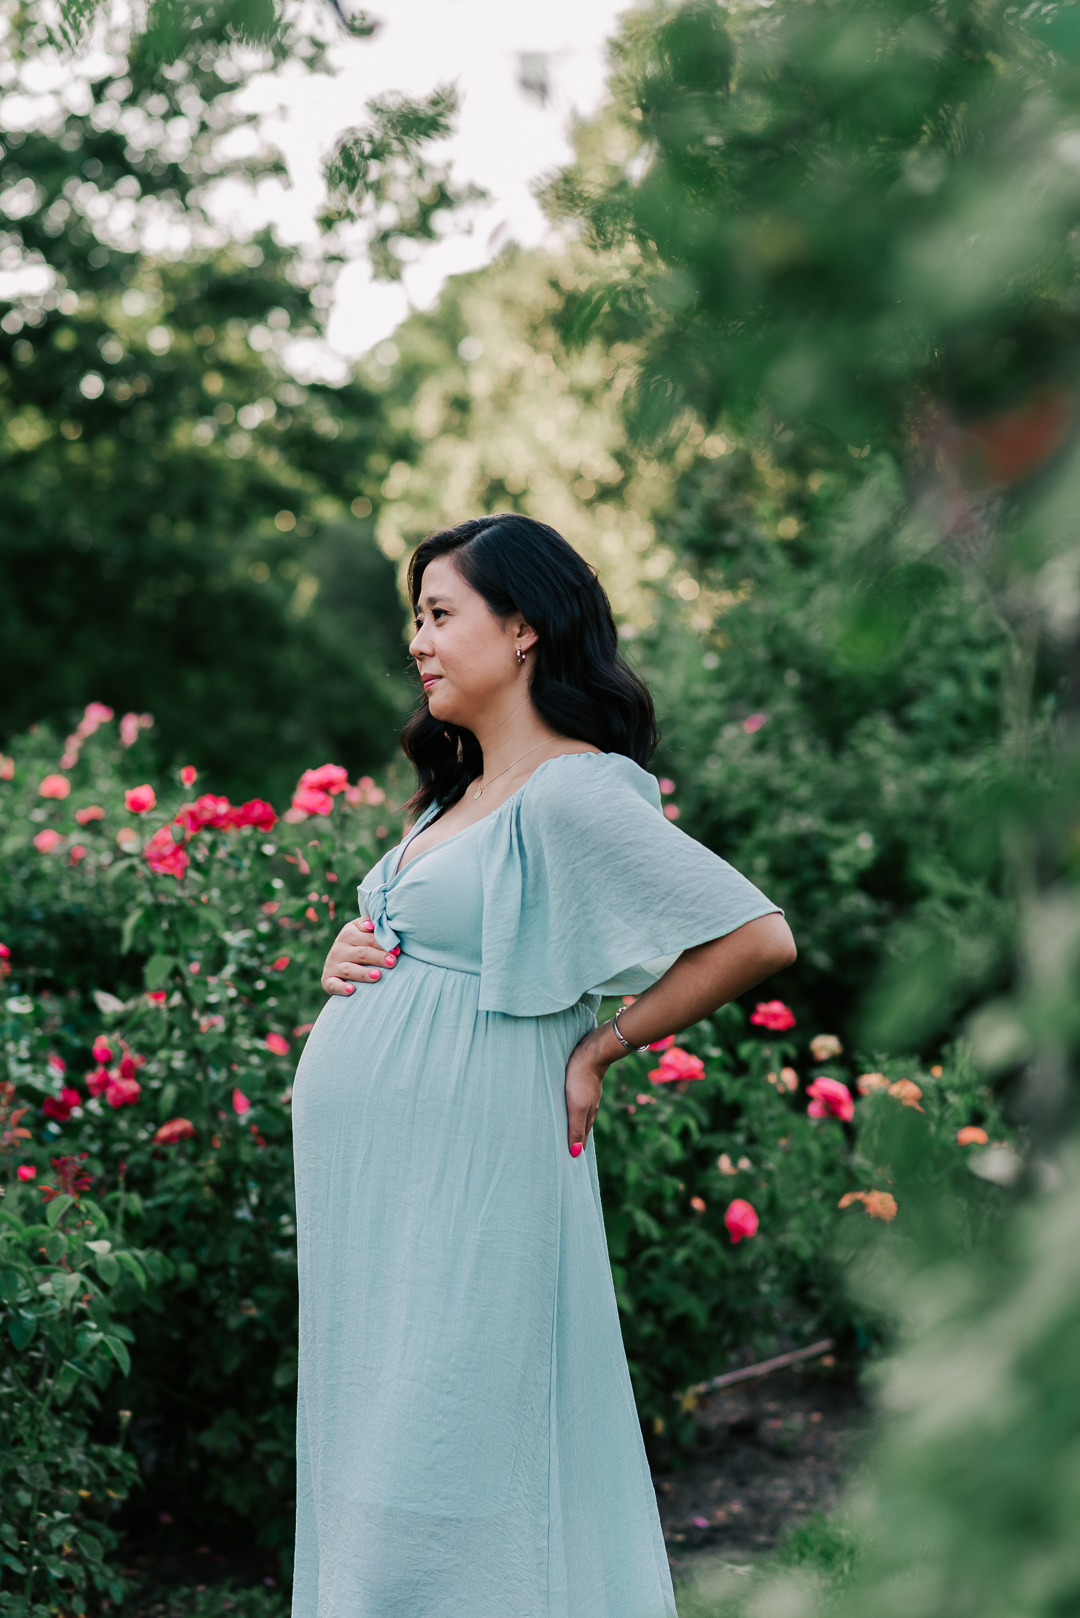 A mom to be stands with a hand on her bump and hip while standing and smiling in a rose garden